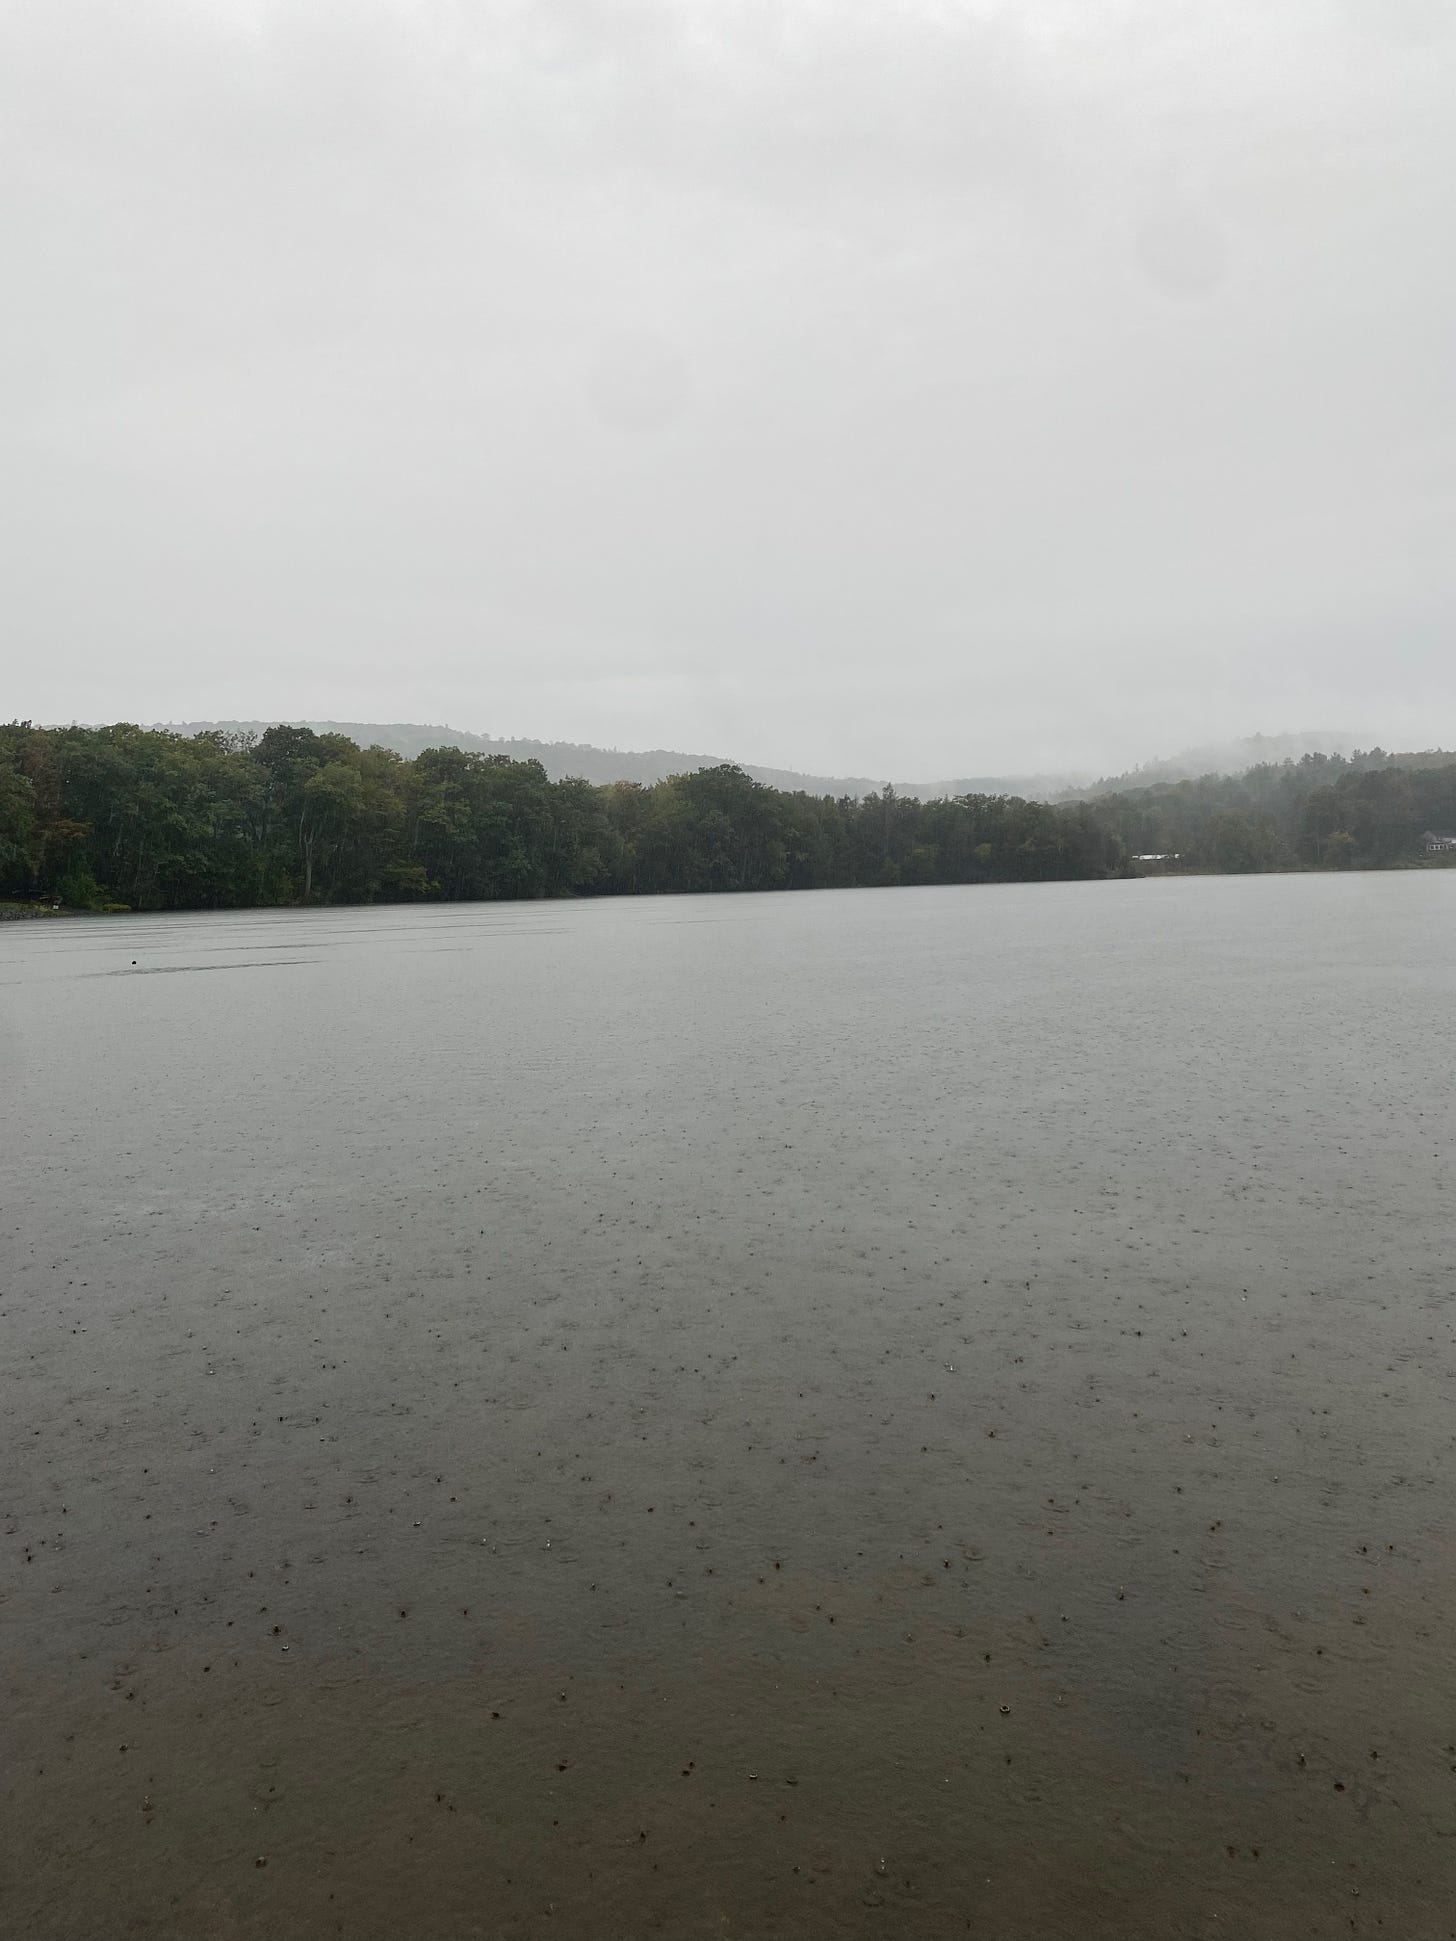 Ashfield Lake on a grey, rainy day, little droplets hitting the smooth surface of the water.